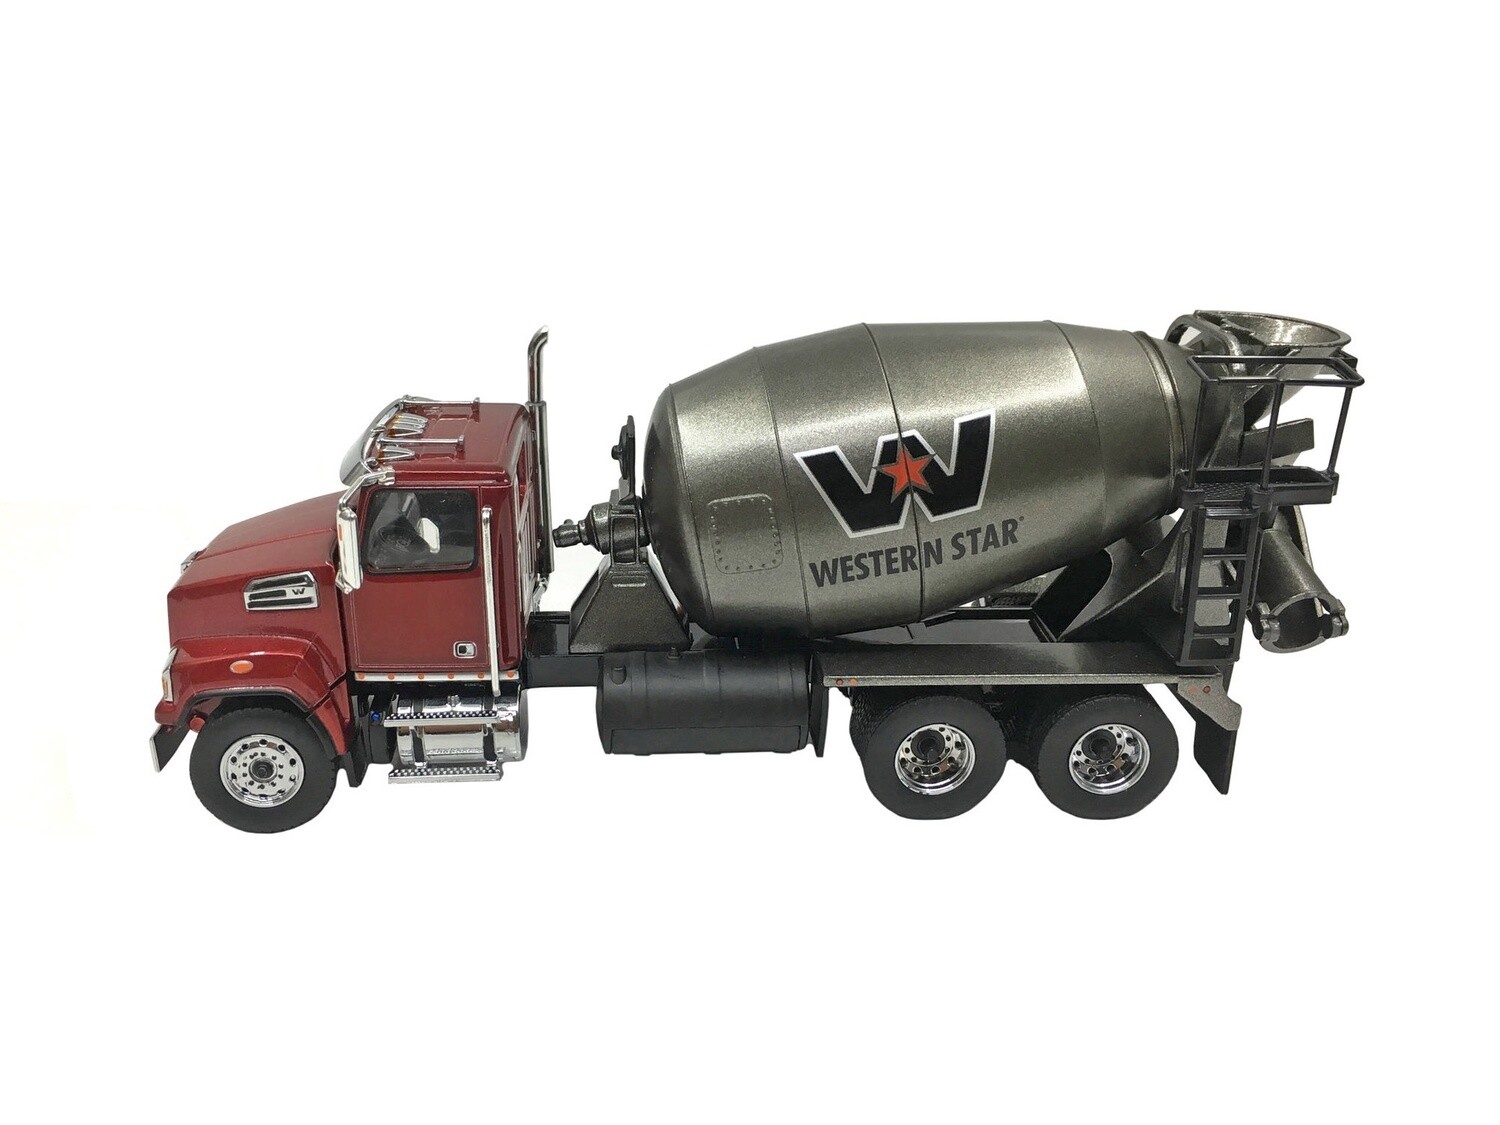 Western Star 4700 SF Two Axle Mixer Truck - Red/Gray